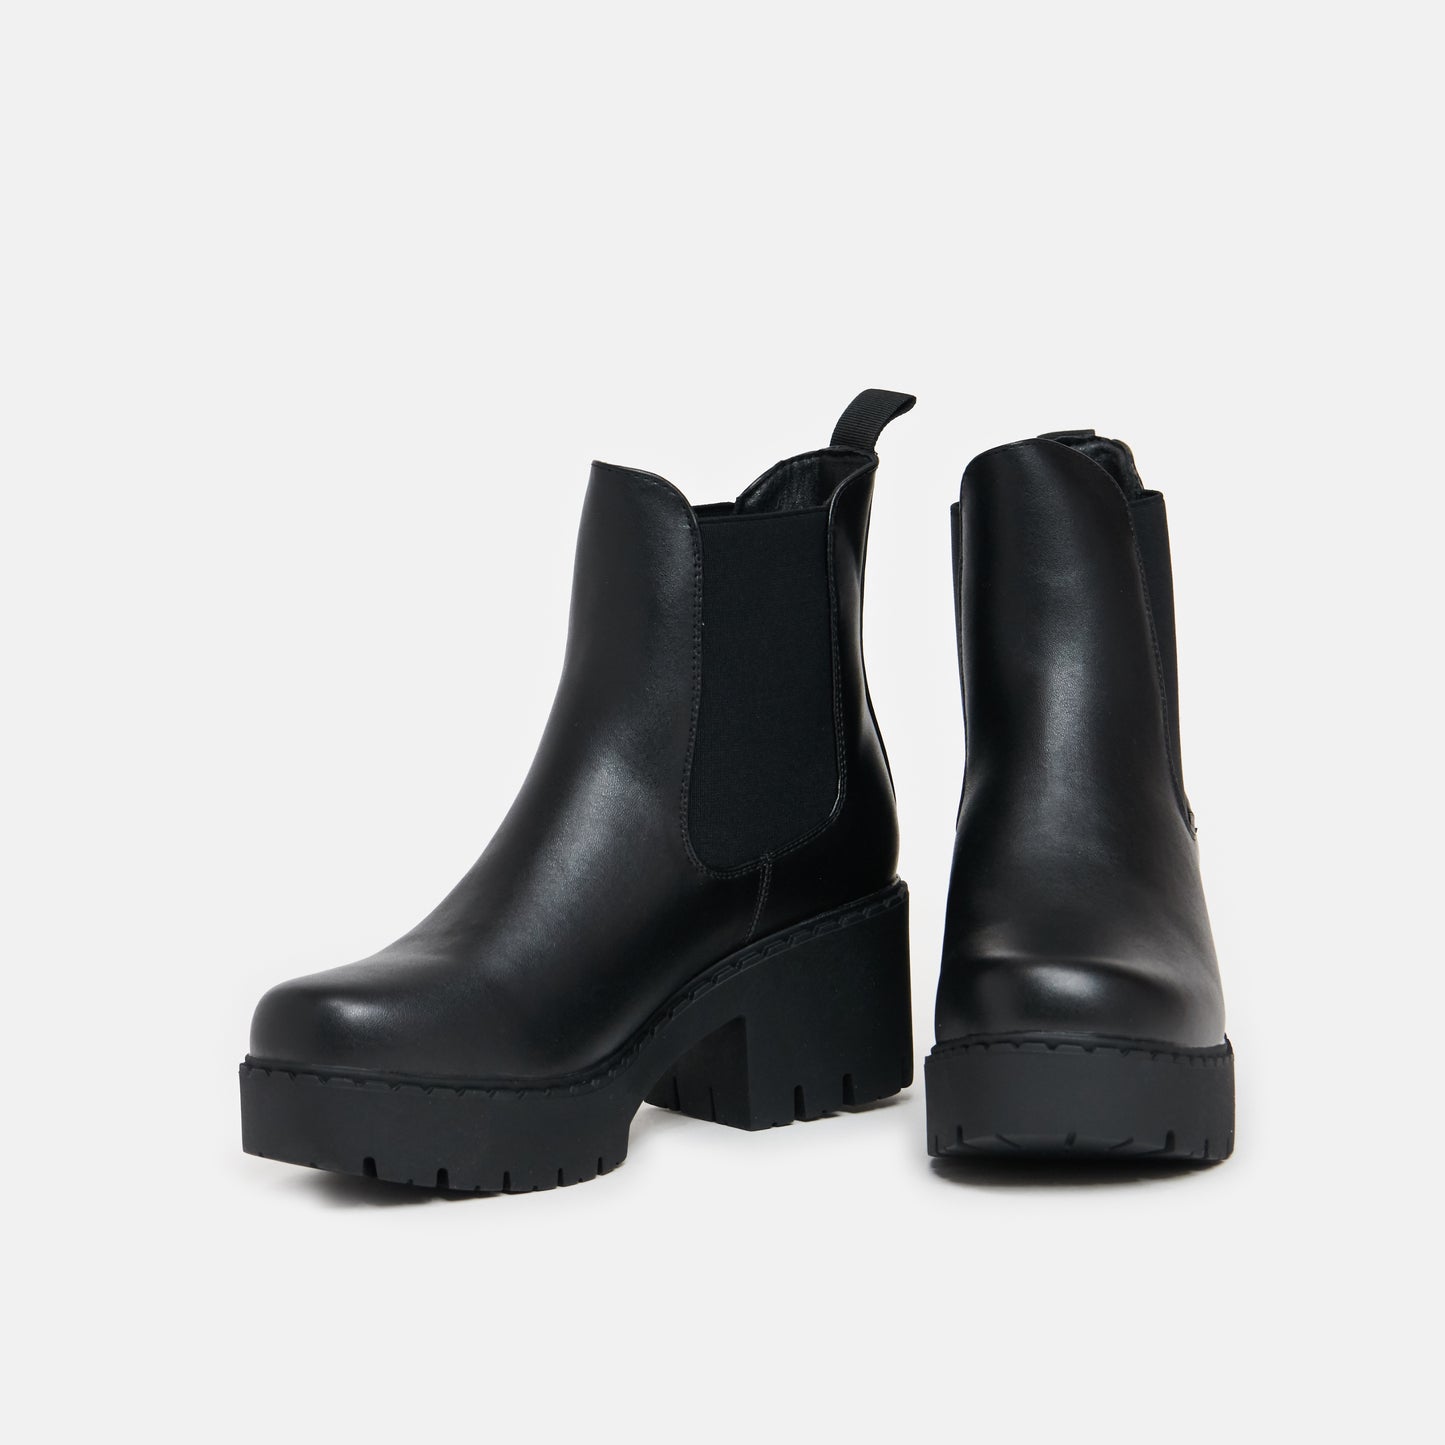 Orson Switch Chelsea Boots - Ankle Boots - KOI Footwear - Black - Front View